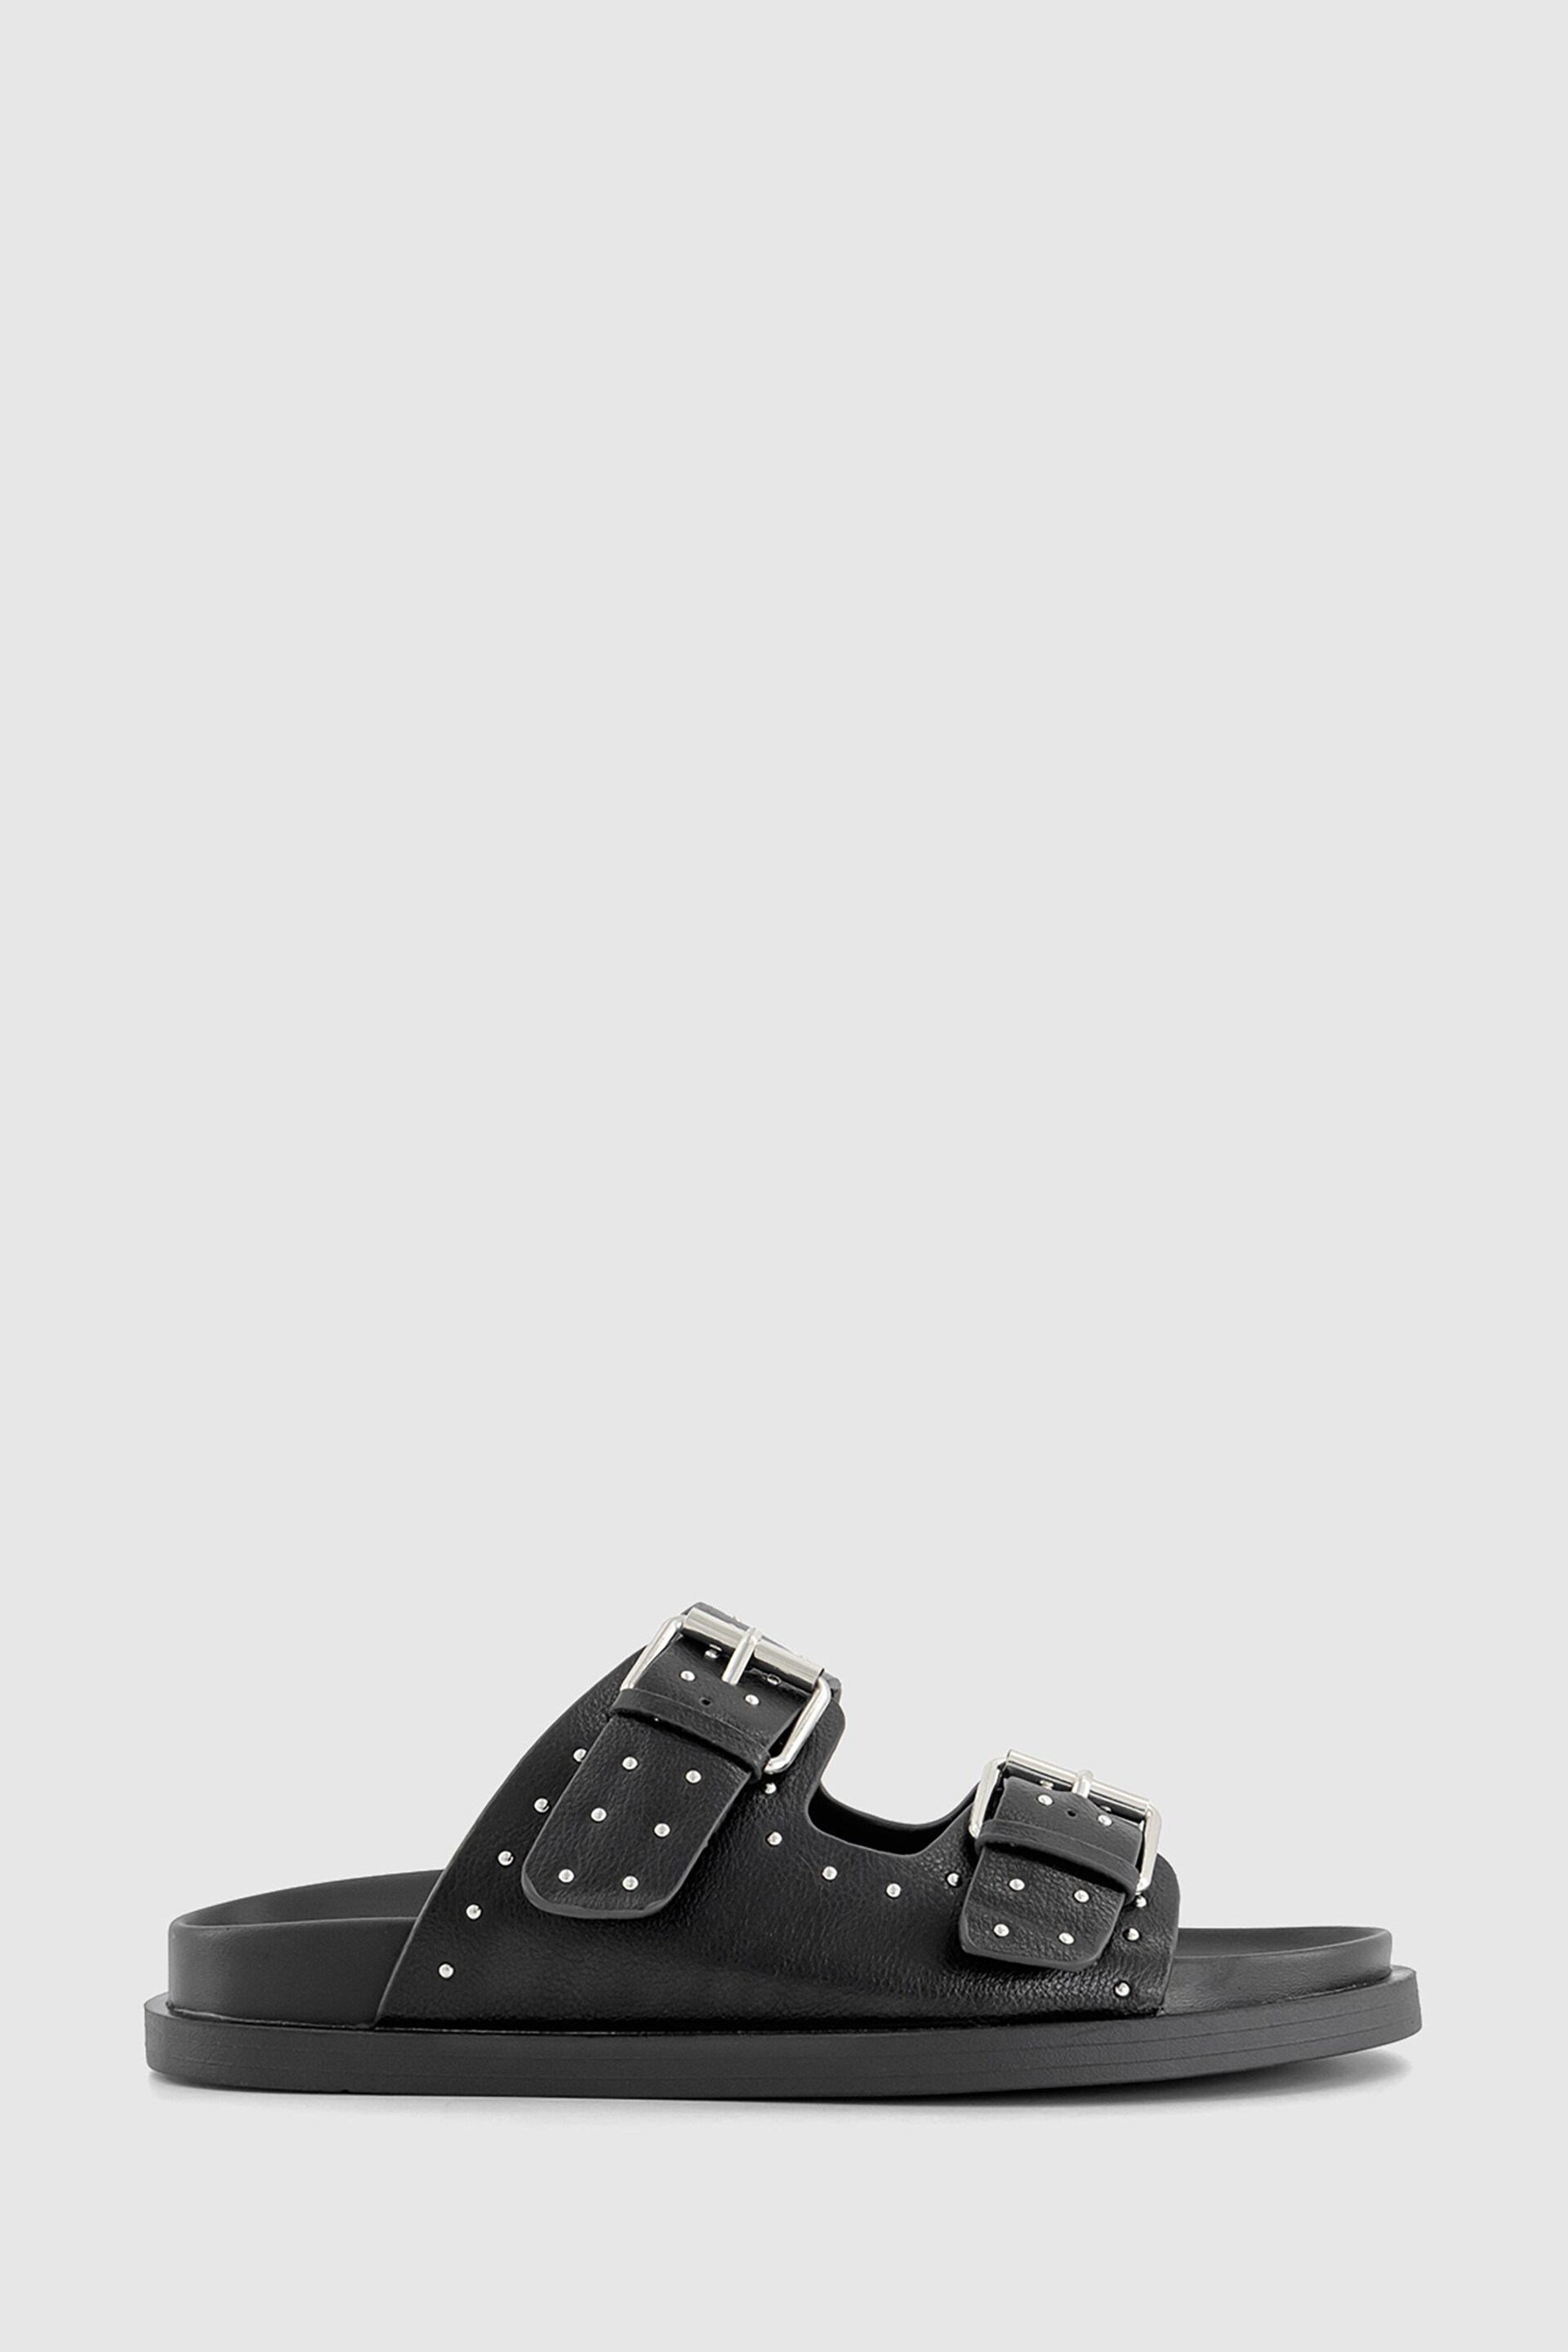 Office Black Double Strap Studded Footbed Sandals - Image 1 of 3